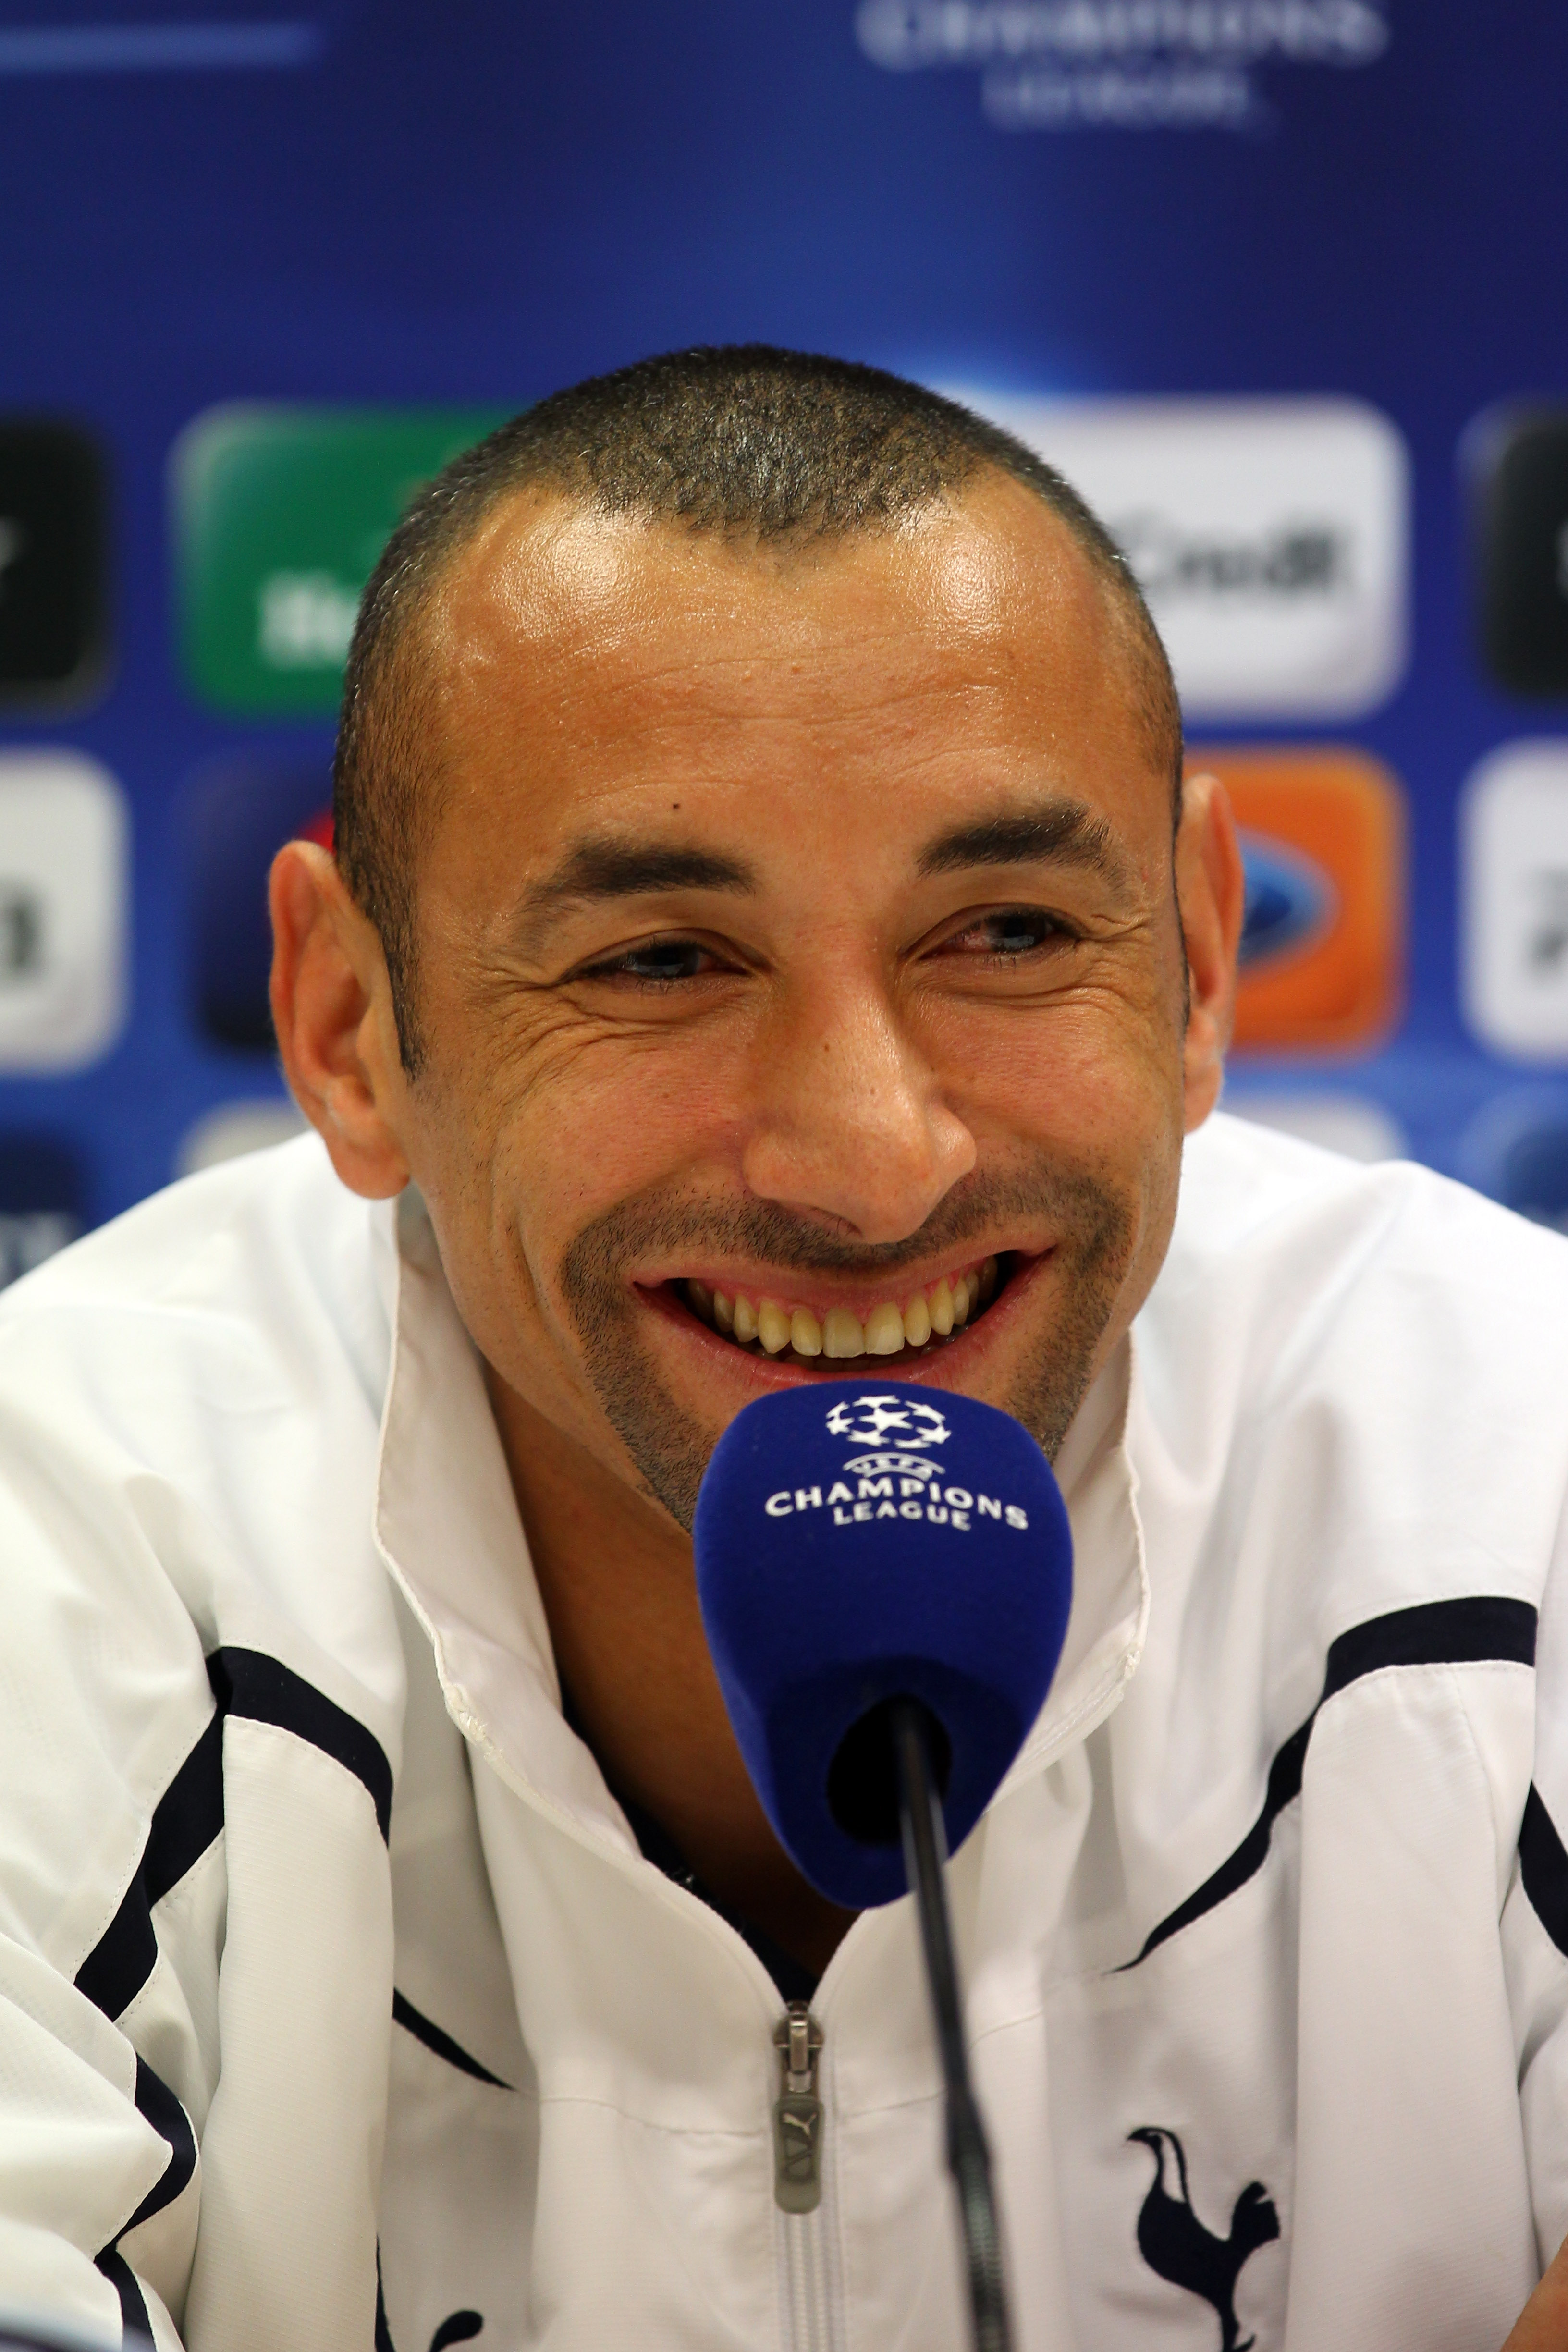 MILAN, ITALY - OCTOBER 19:  Heurelho Gomes of Tottenham Hotspur talks to the media ahead of their UEFA Champions League Group A match against Inter Milan, during a press conference at the San Siro Stadium on October 19, 2010 in Milan, Italy.  (Photo by Cl